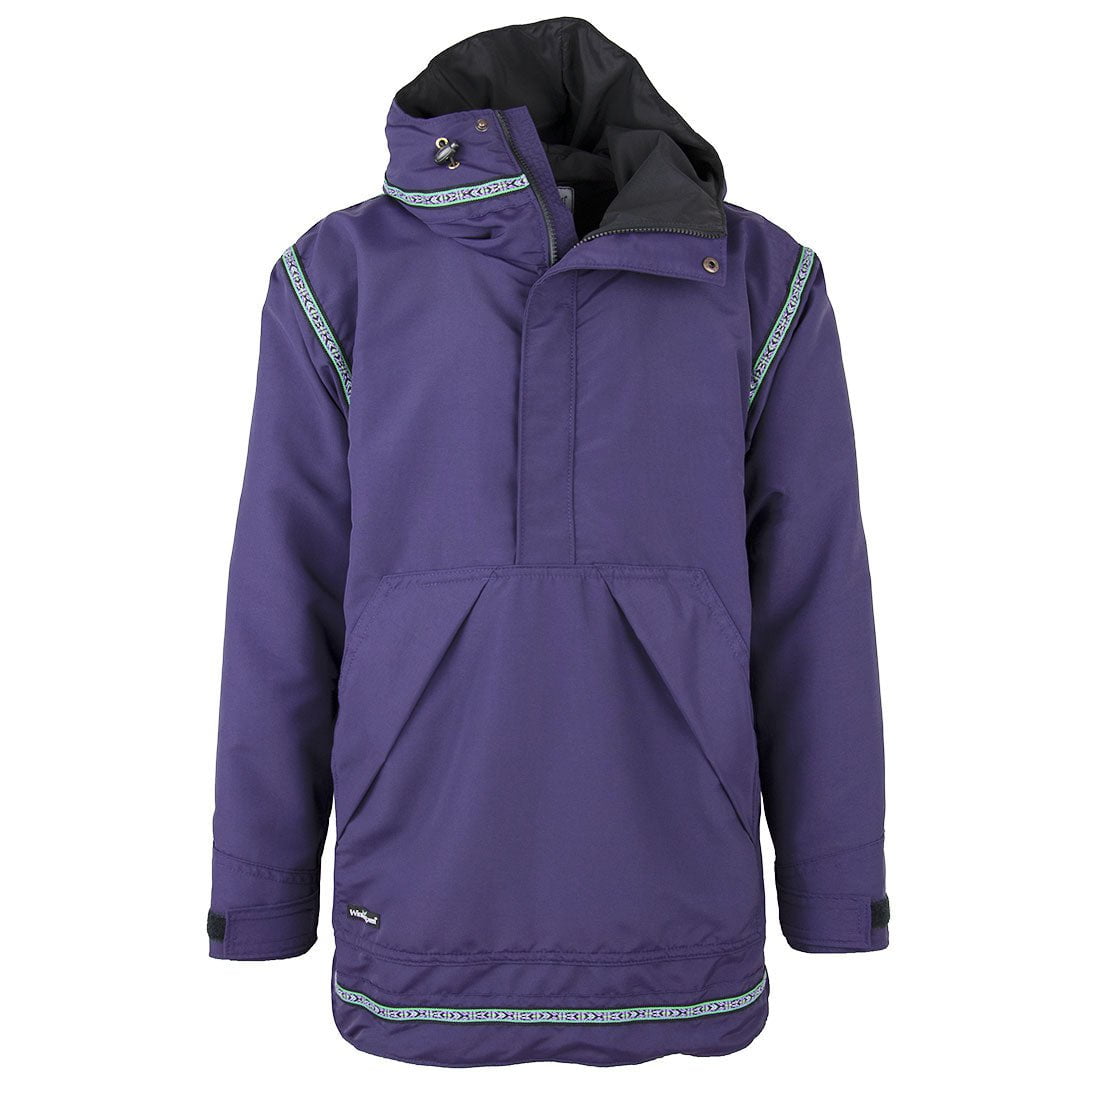 Expedition Shell Anorak Full Zip (Men's)-Made in Ely, MN.